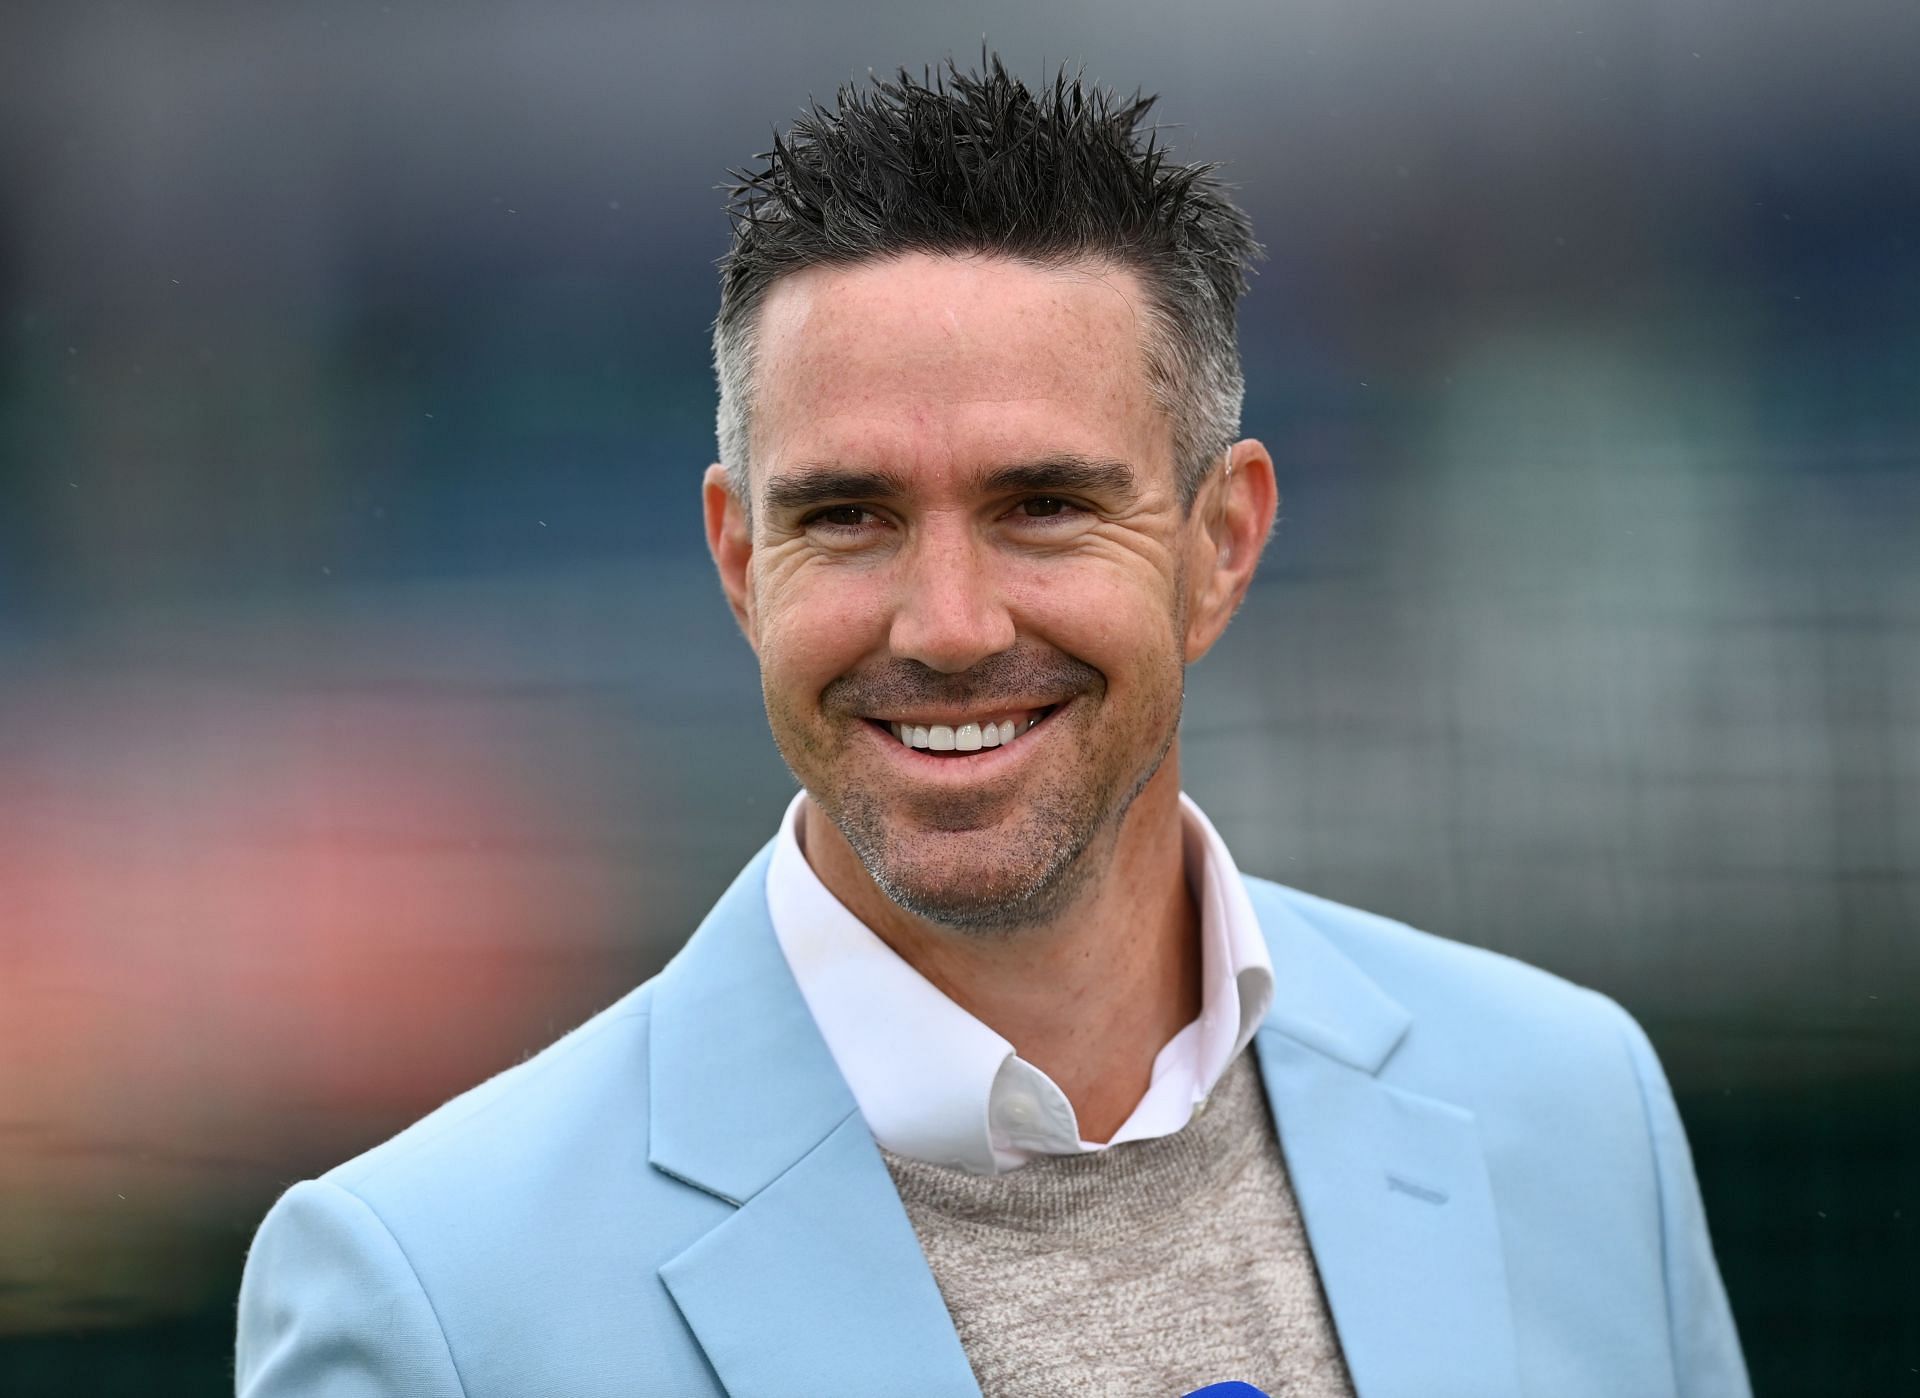 Kevin Pietersen often curbed his natural aggressive instinct in fear of backlash